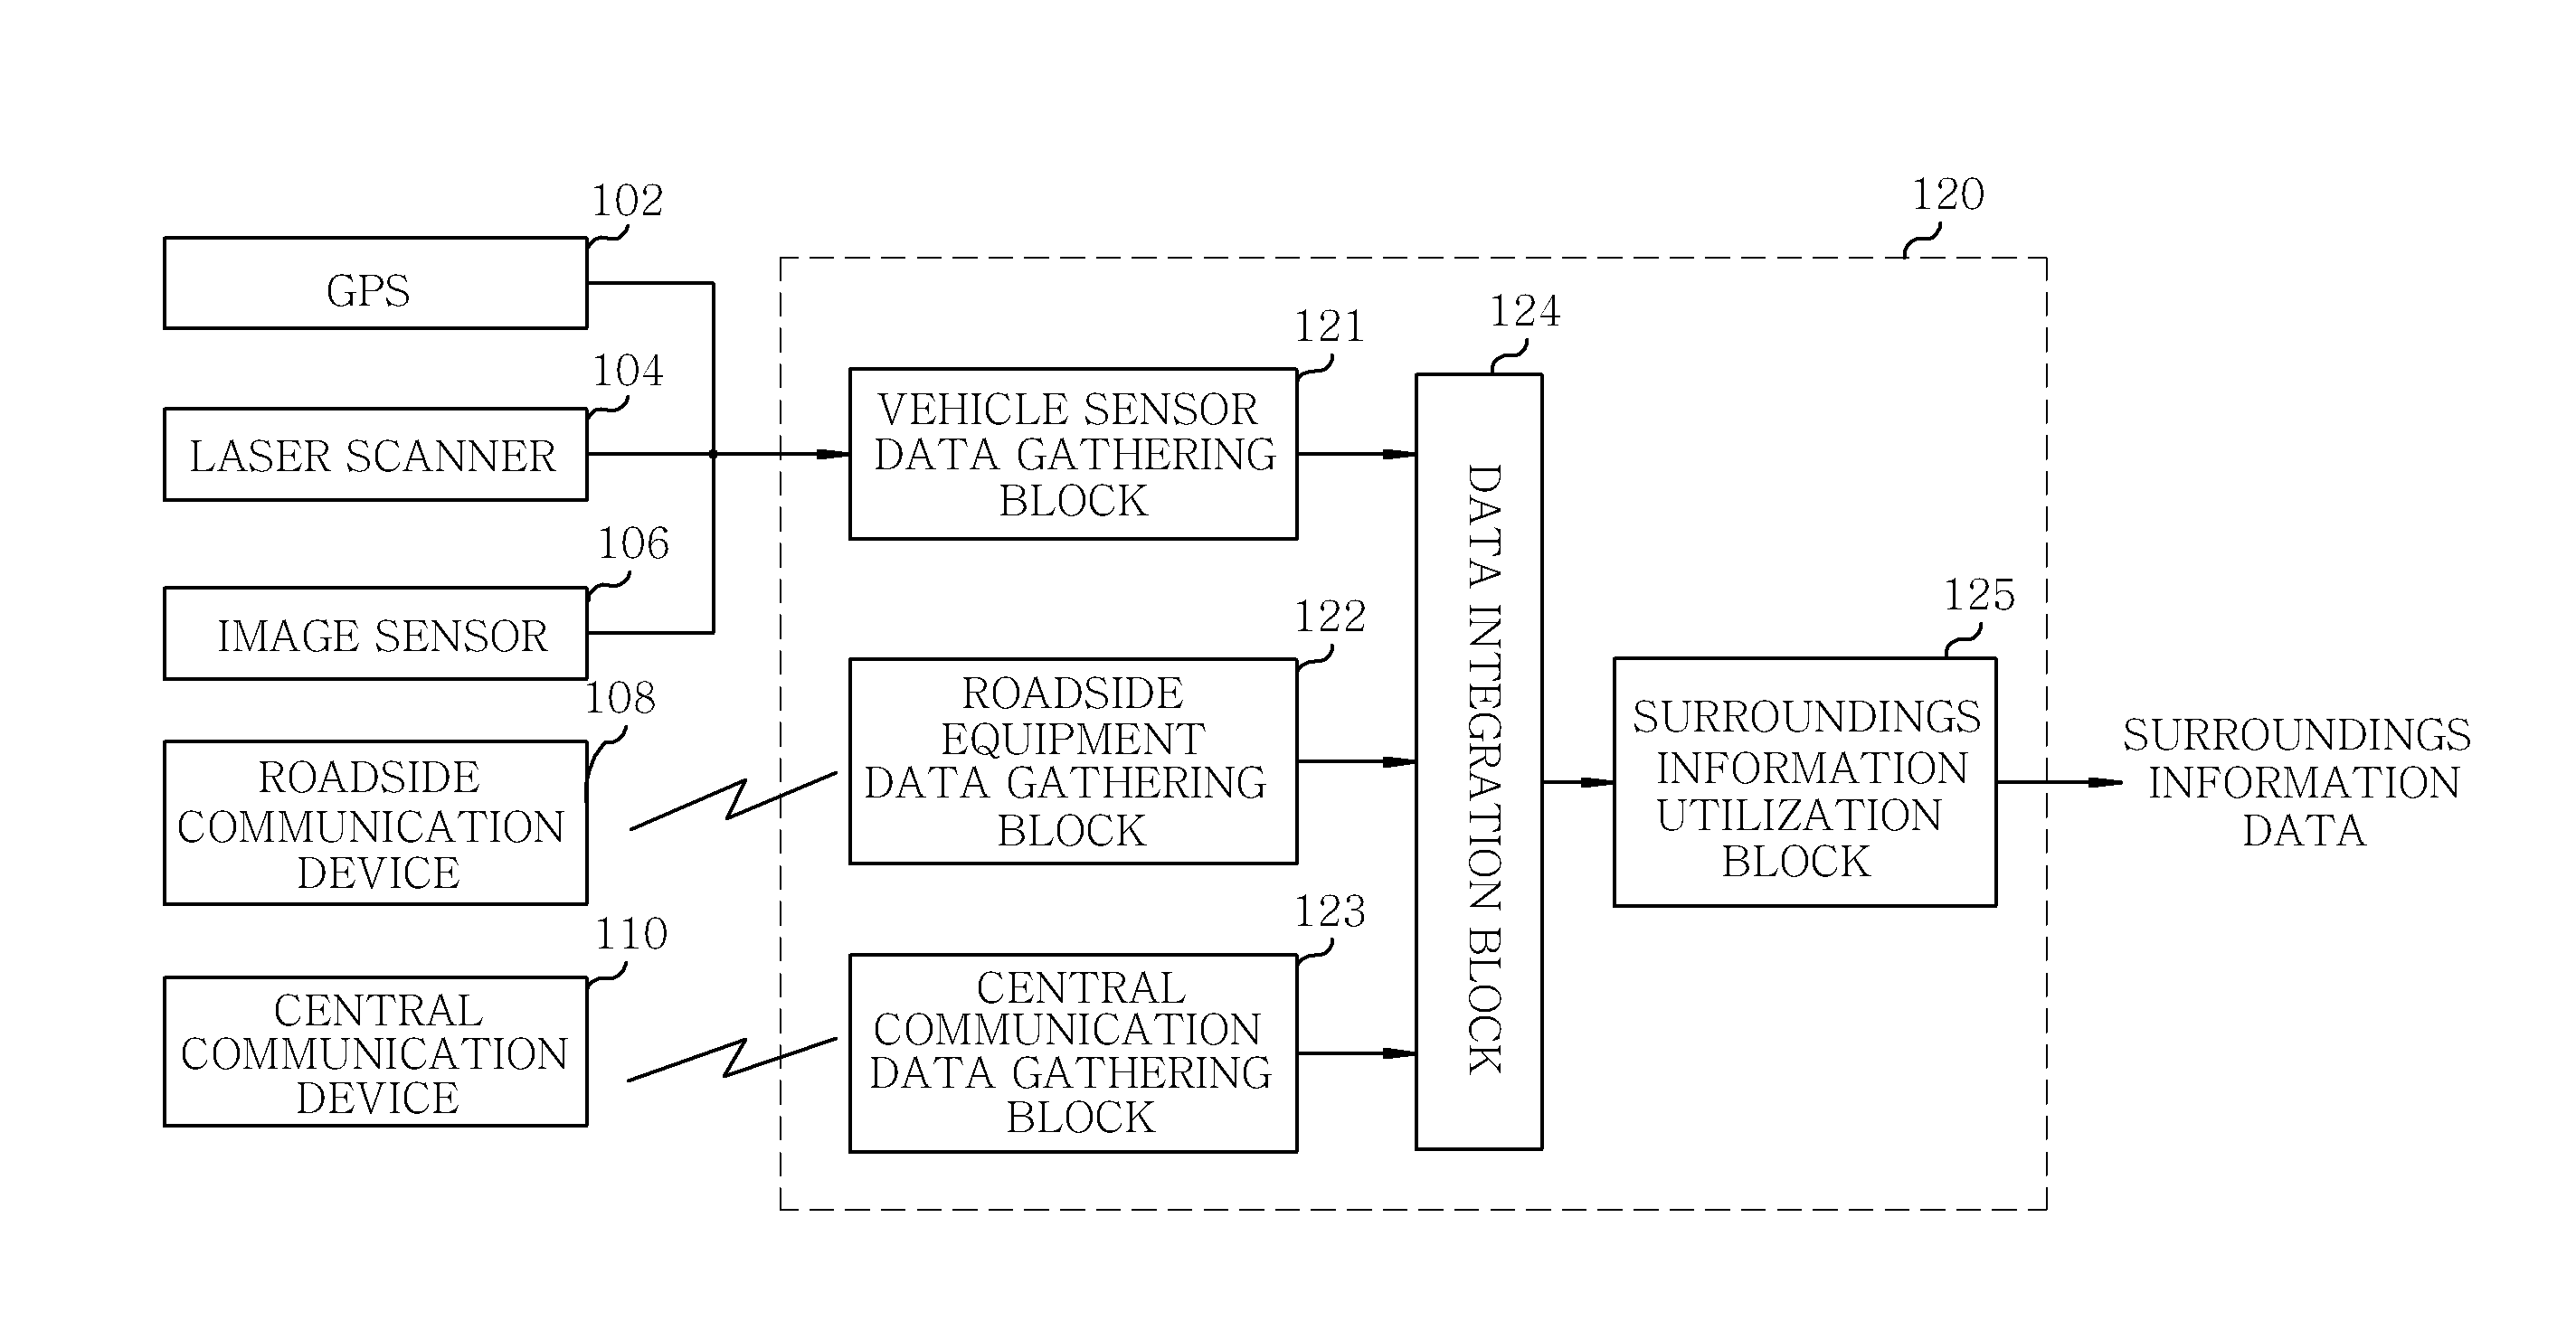 Apparatus for gathering surroundings information of vehicle